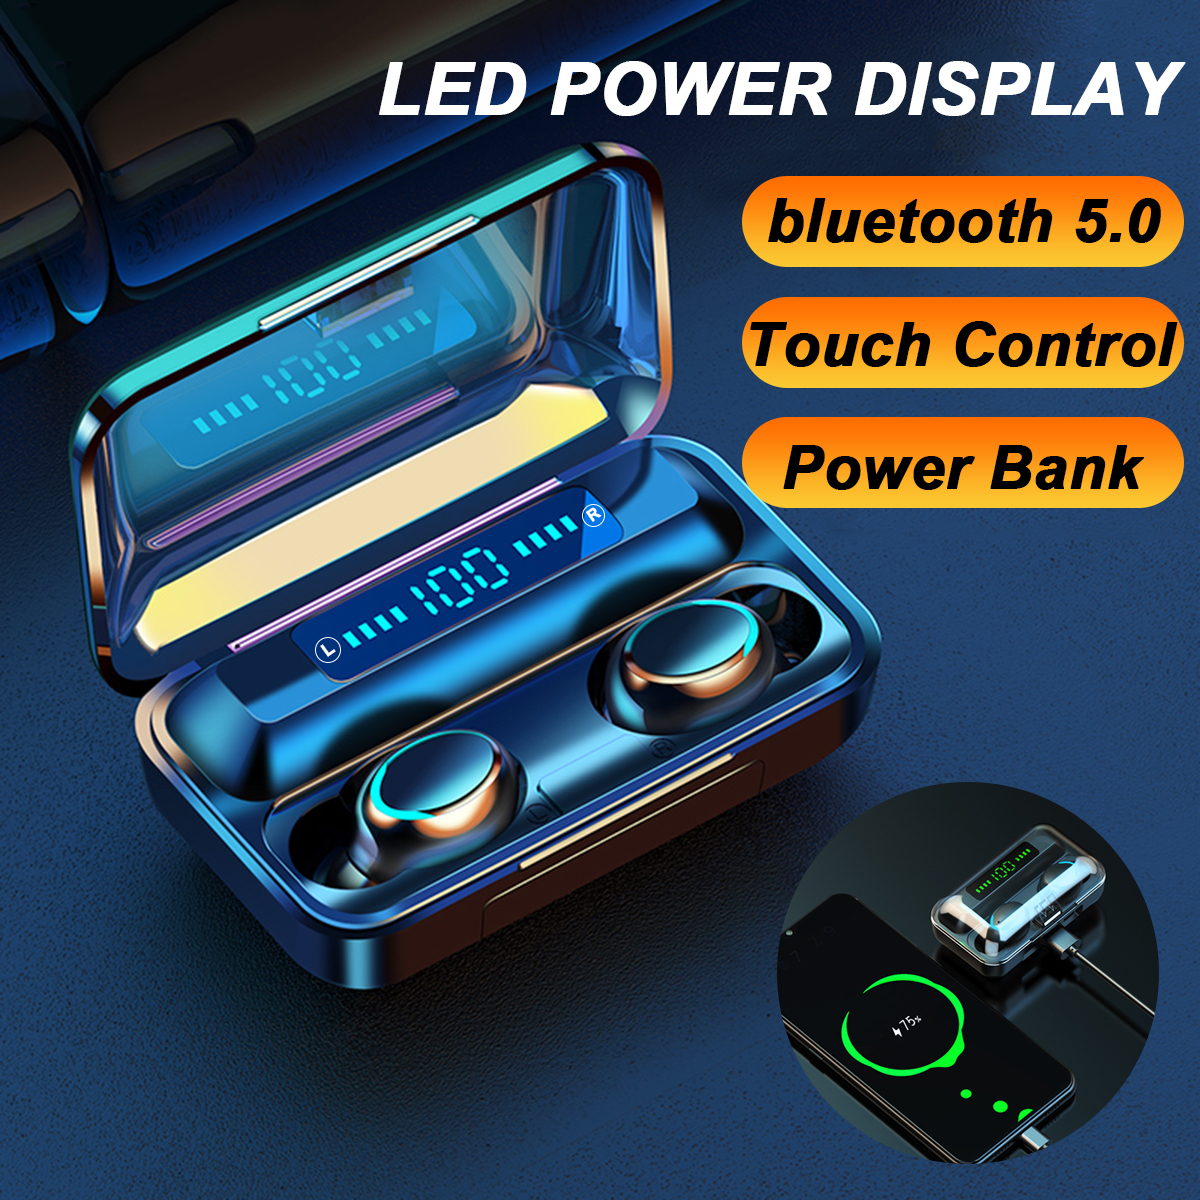 Mini-TWS-Wireless-bluetooth-50-Earphone-LED-Display-Power-Bank-Smart-Touch-Headphone-with-Mic-for-iP-1629900-1